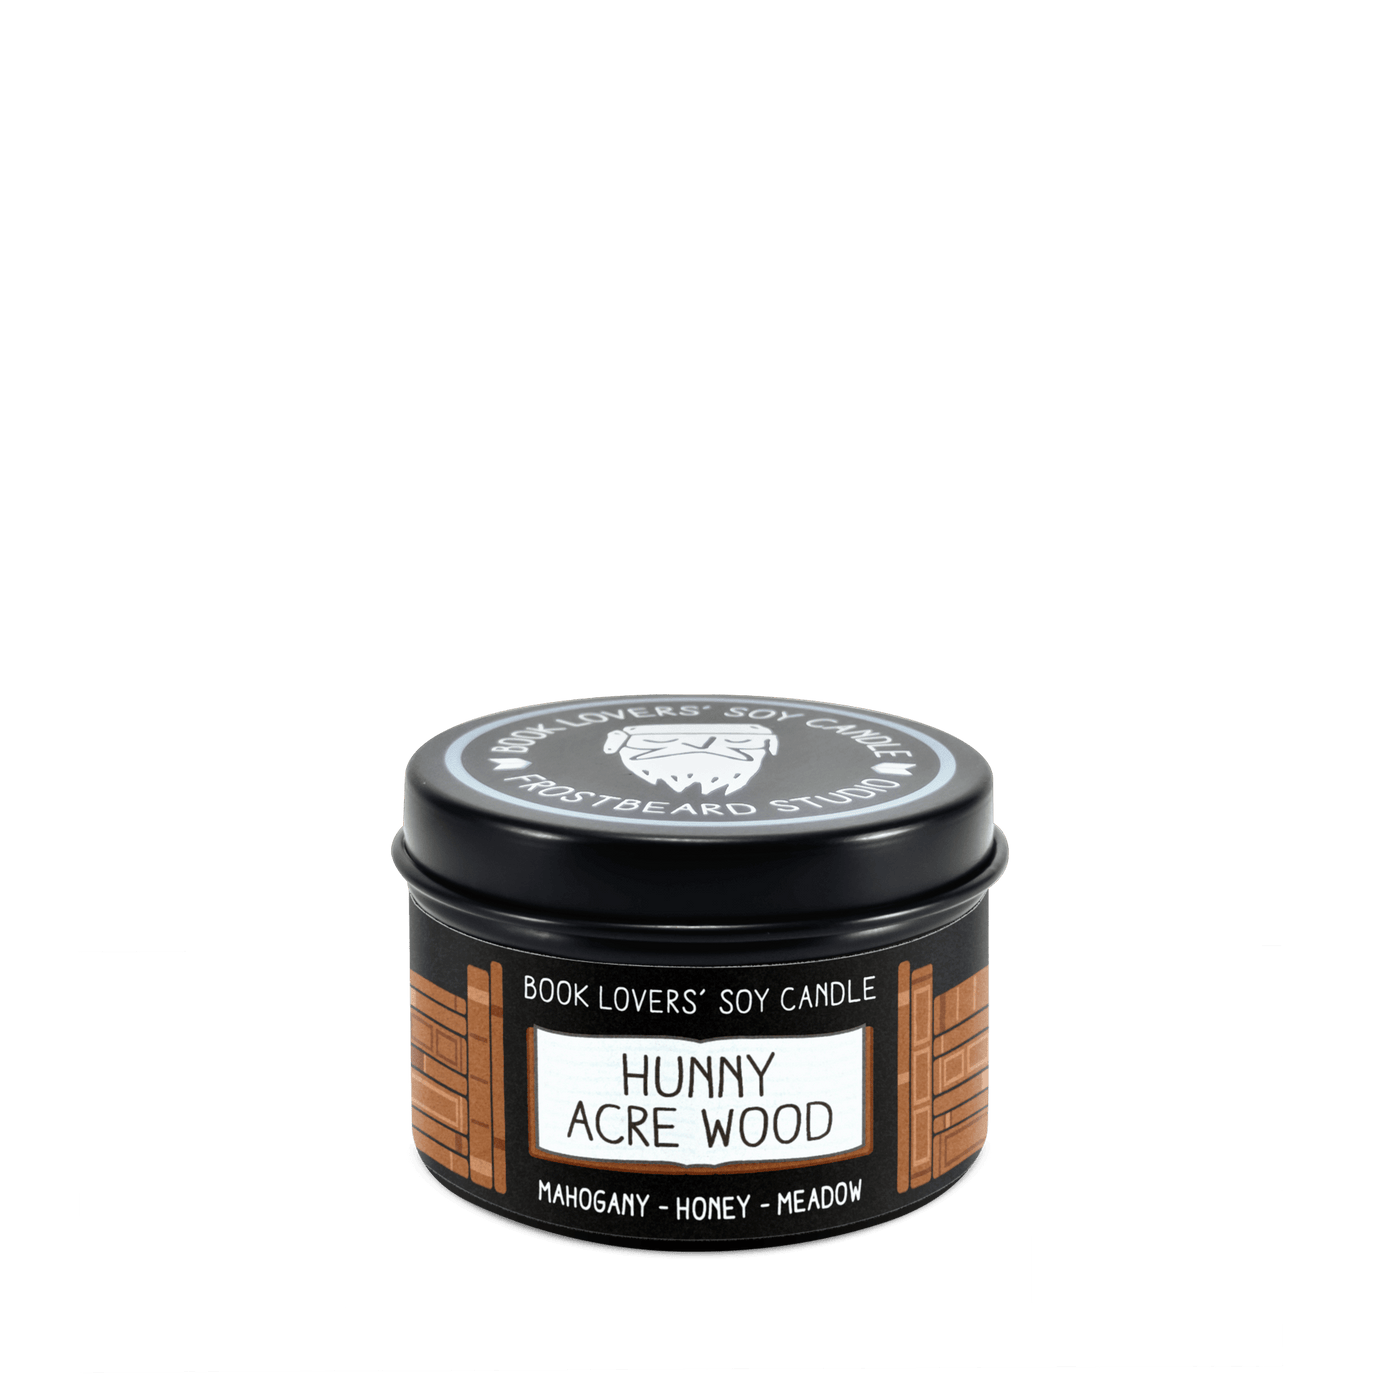 Hunny Acre Wood  -  2 oz Tin  -  Book Lovers' Soy Candle  -  Frostbeard Studio